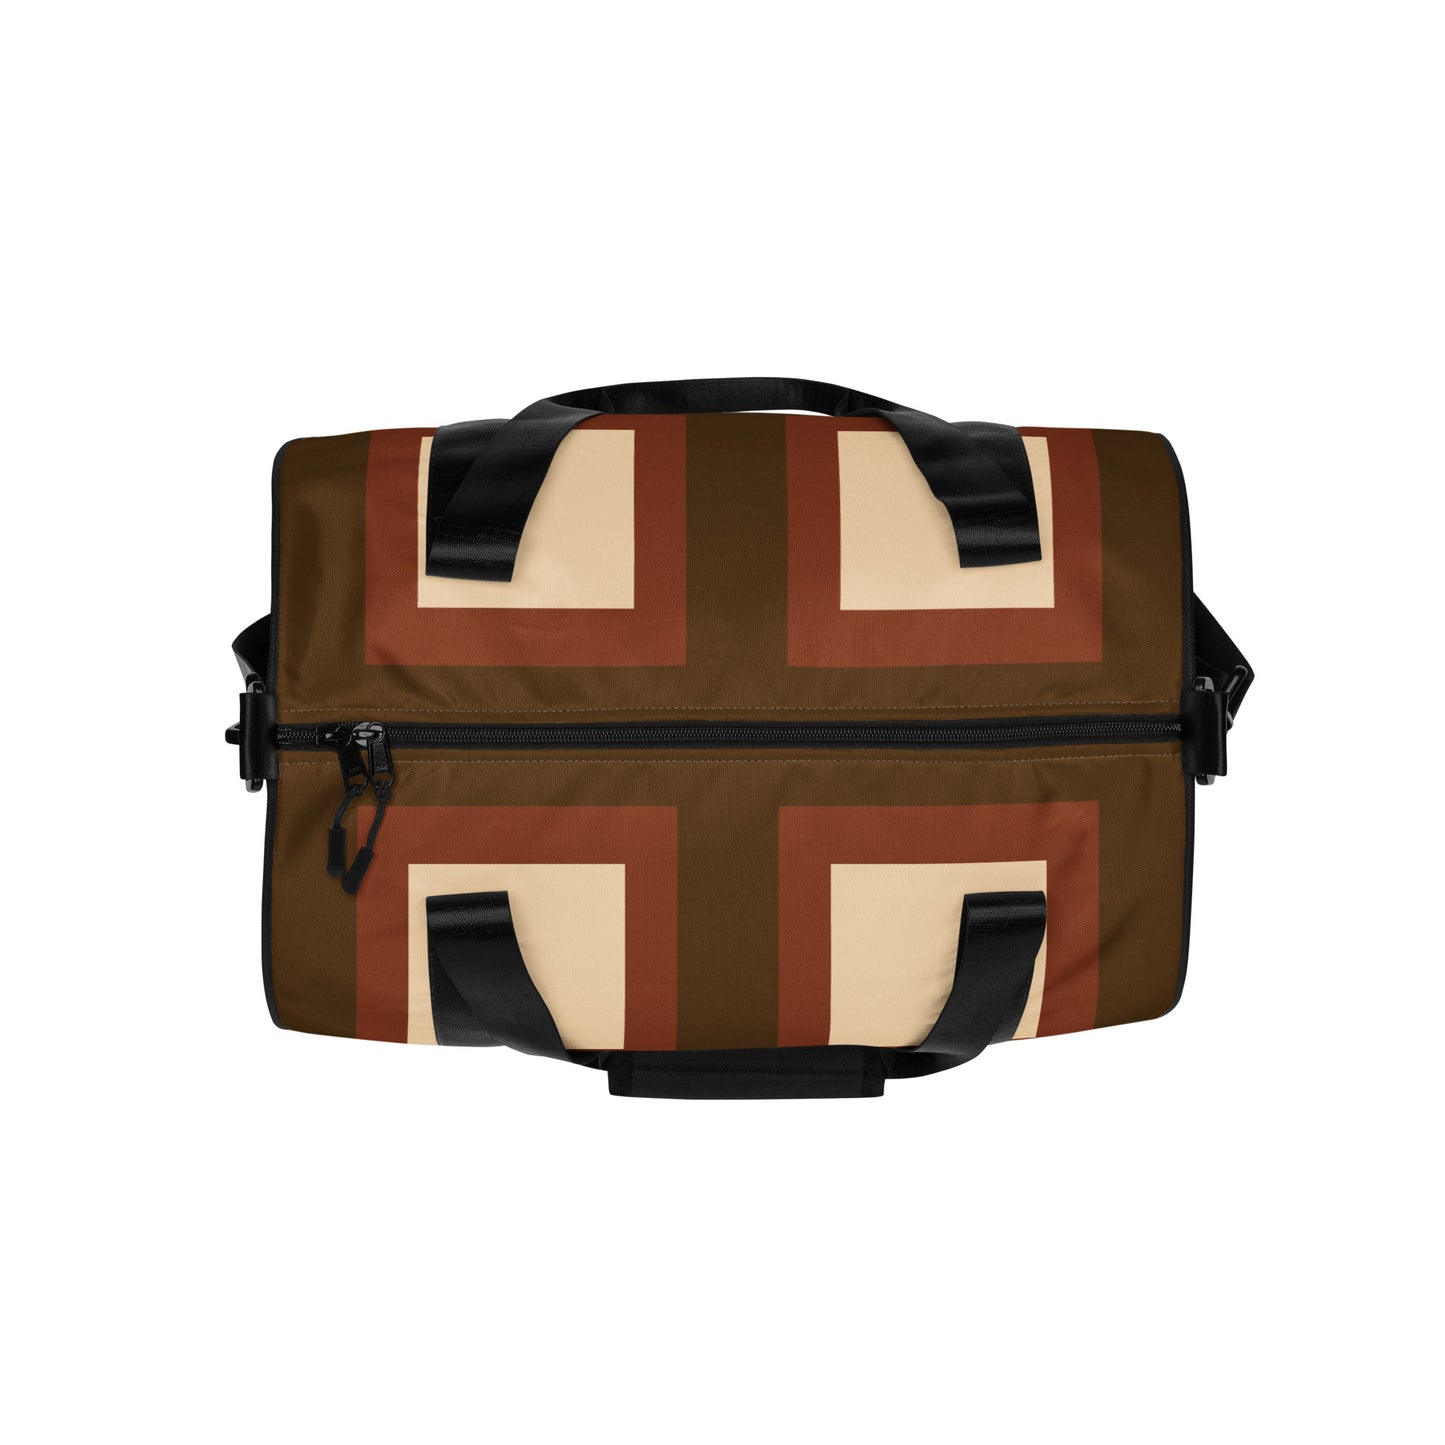 Retro Block - Inspired By Harry Styles - Sustainably Made gym bag